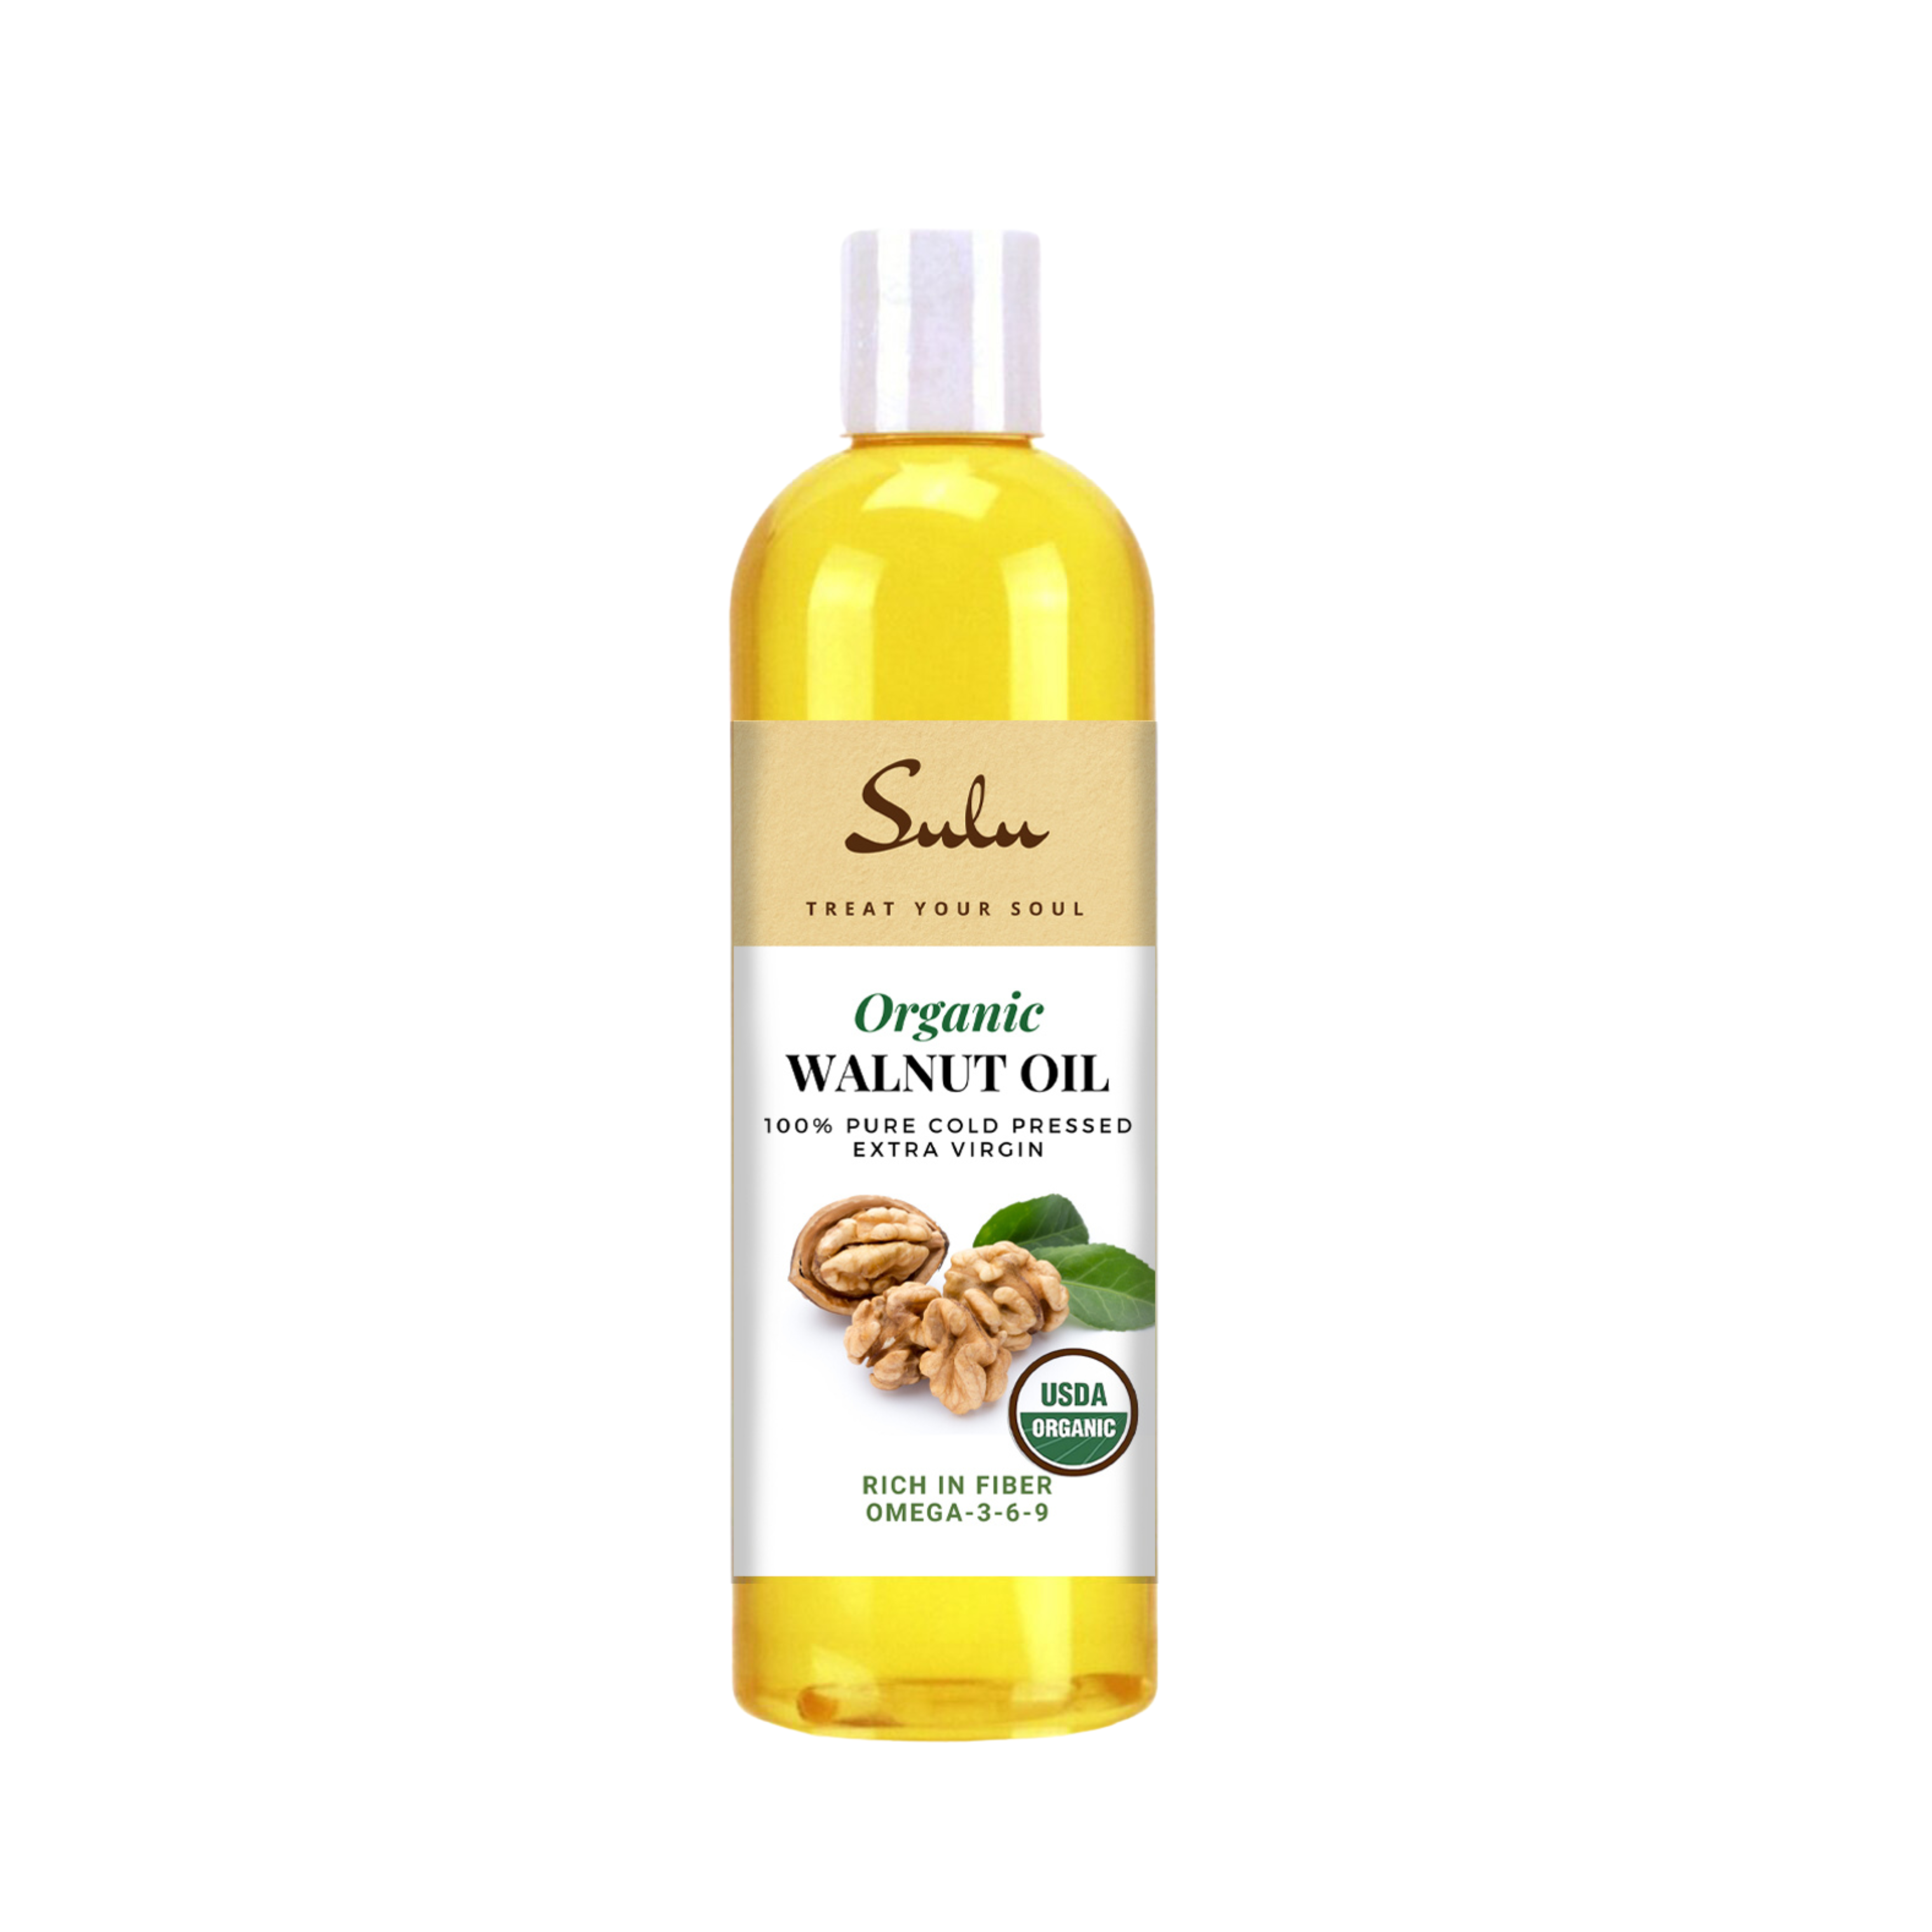 Walnut Oil Benefits, Nutrition & Comparison To Other Oils